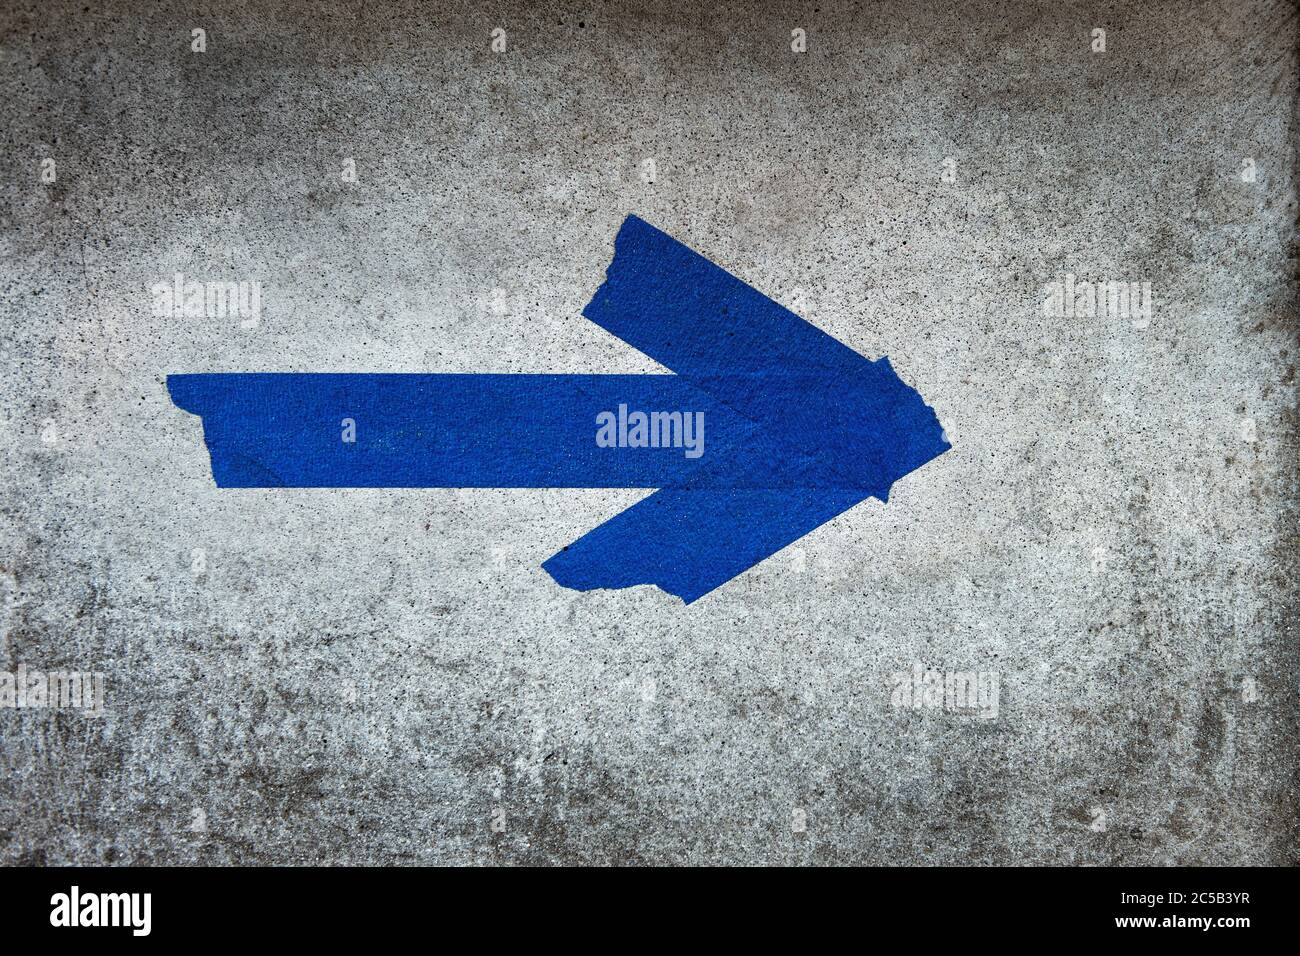 Horizontal shot of an arrow sign made from blue ducktape on a cement wall Stock Photo